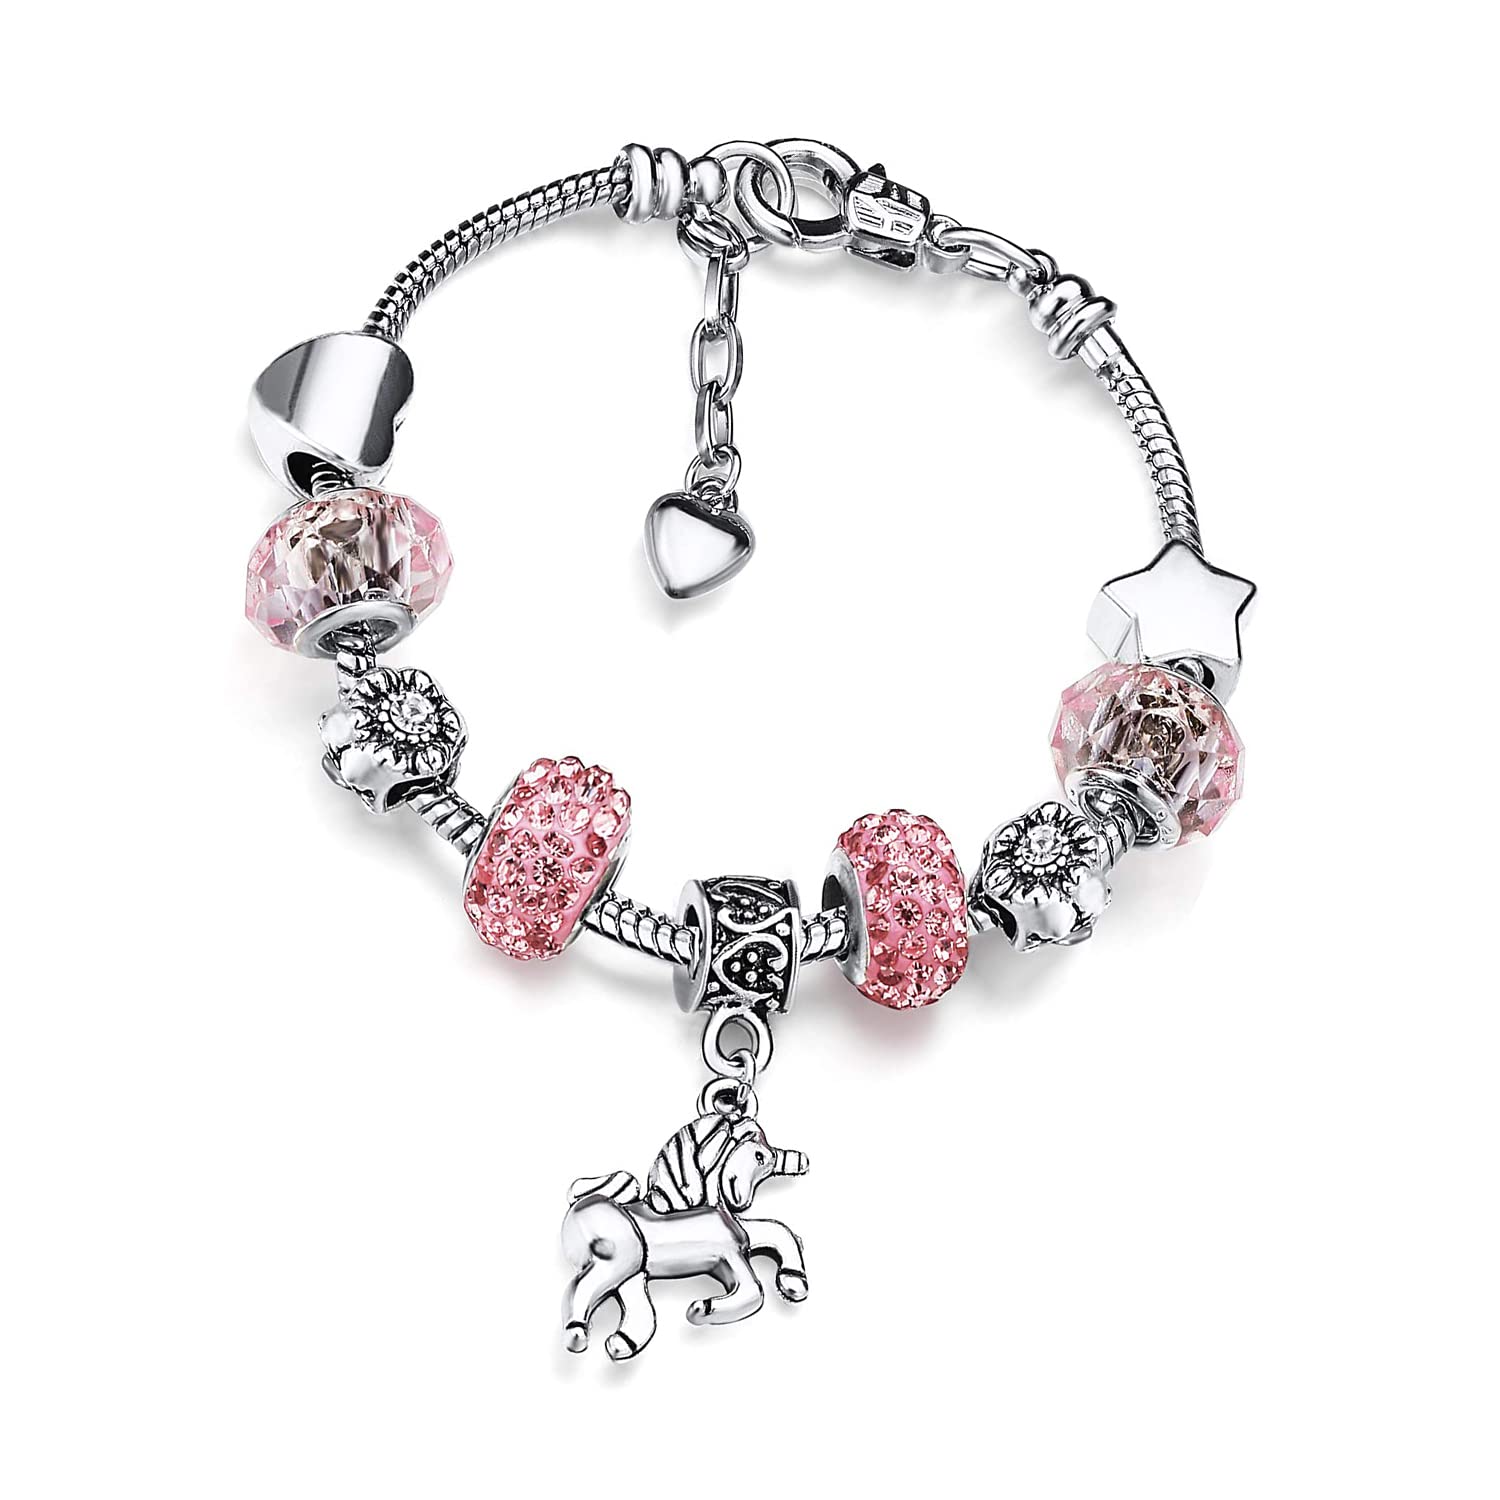 BaiJ Unicorn Girls Bracelets,Girls Magical Sparkly Pink Crystal Charm Bracelet for Kids Birthday Gifts Children Jewellery Presents Ancient Silver and Rhinestones 6-12 Years Old, white, One Size, 443